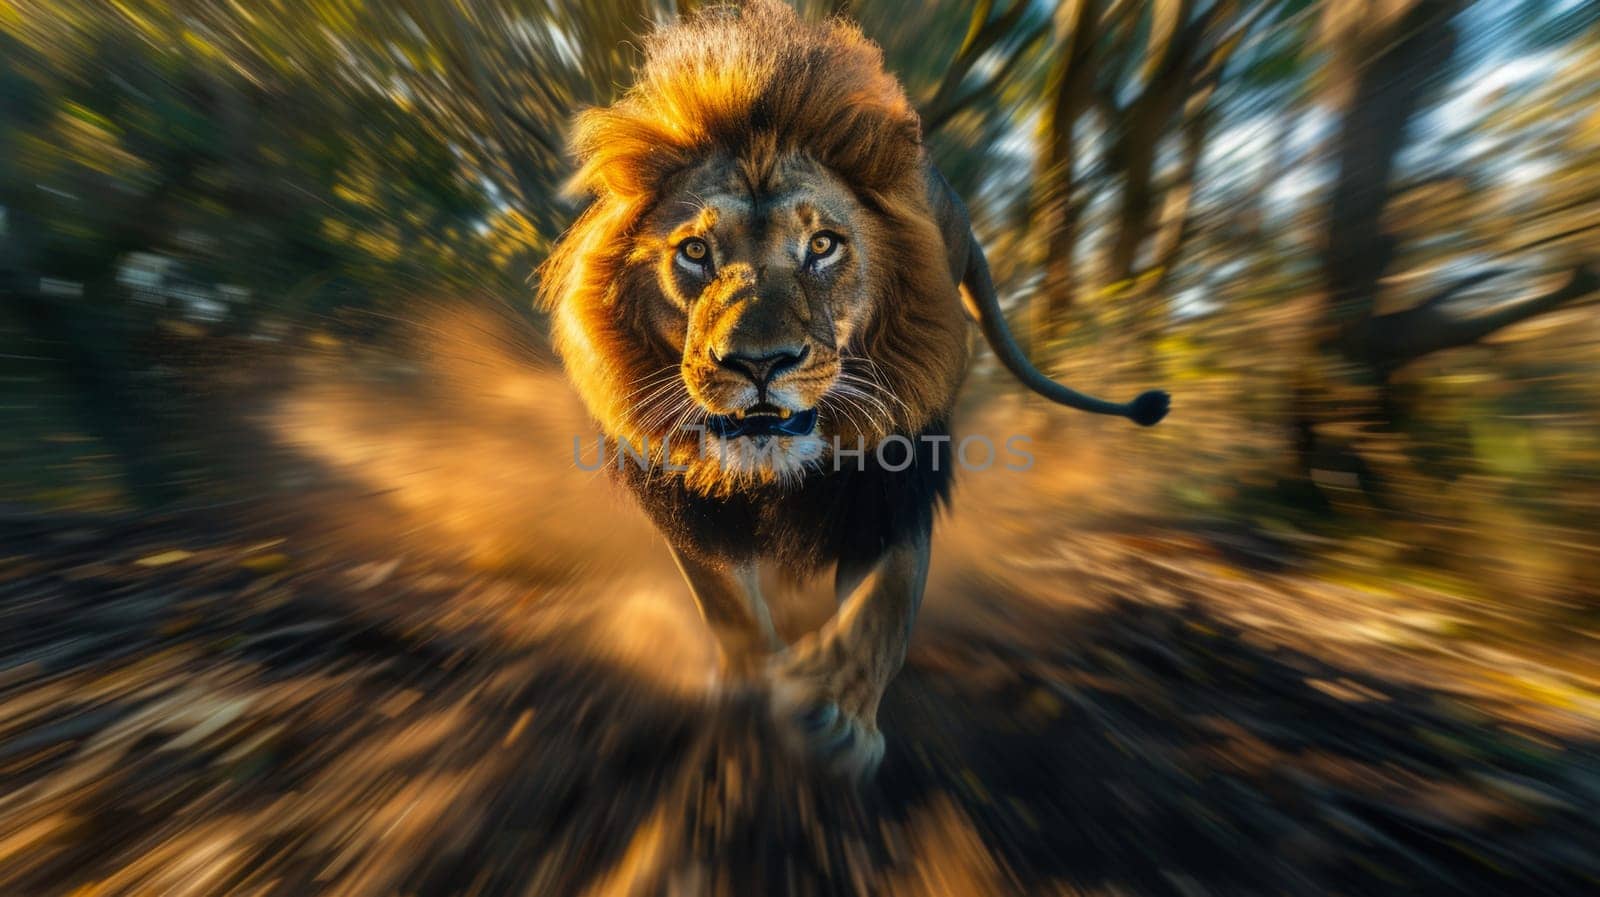 A lion running through the woods with a blurry background